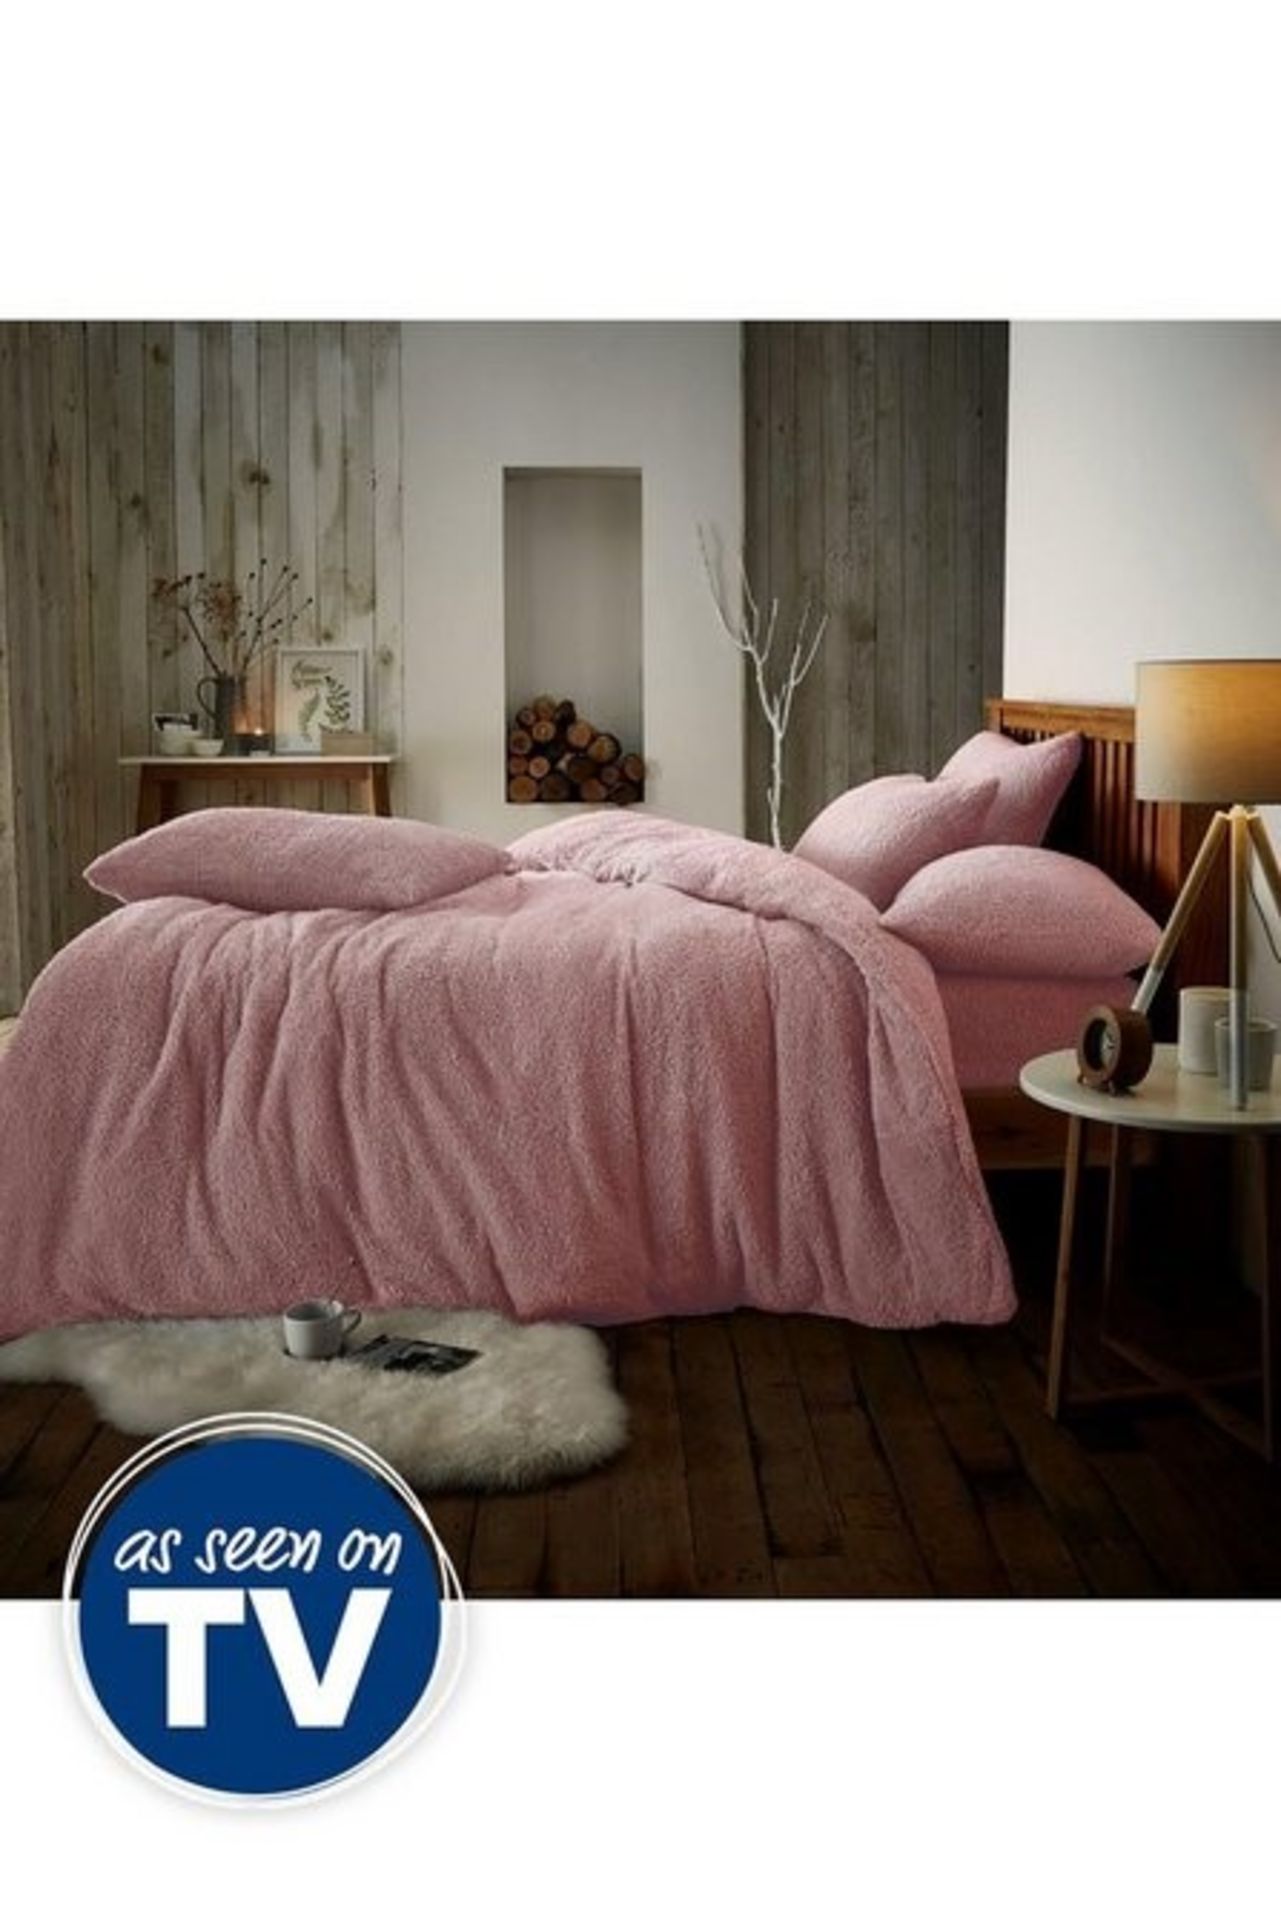 1 AS NEW BAGGED ULTRA COSY TEDDY FLEECE DOUBLE DUVET SET IN PINK (VIEWING HIGHLY RECOMMENDED)